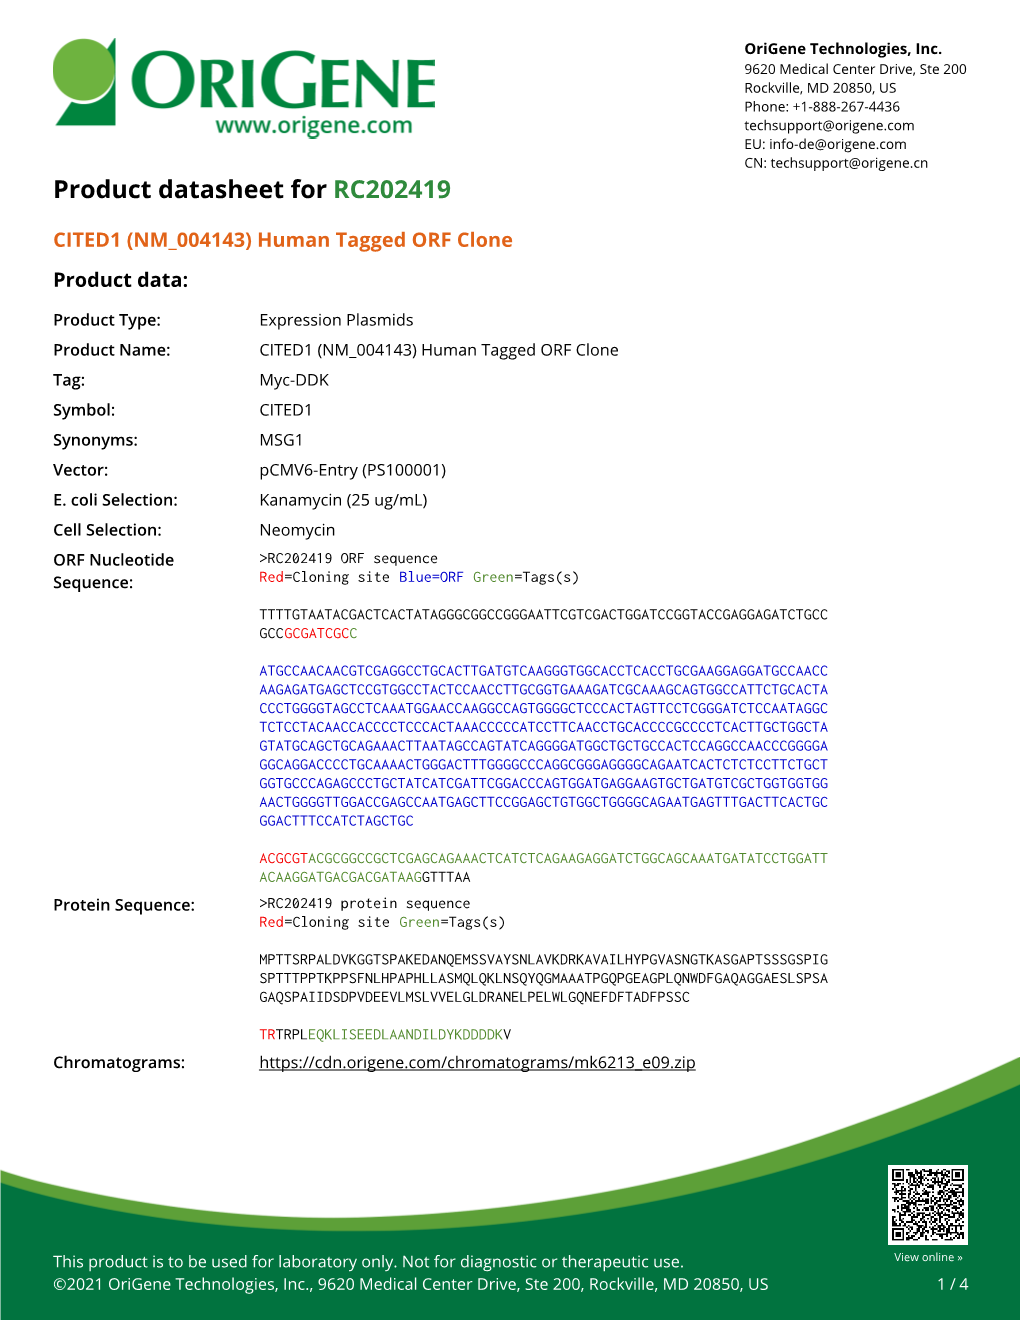 CITED1 (NM 004143) Human Tagged ORF Clone Product Data